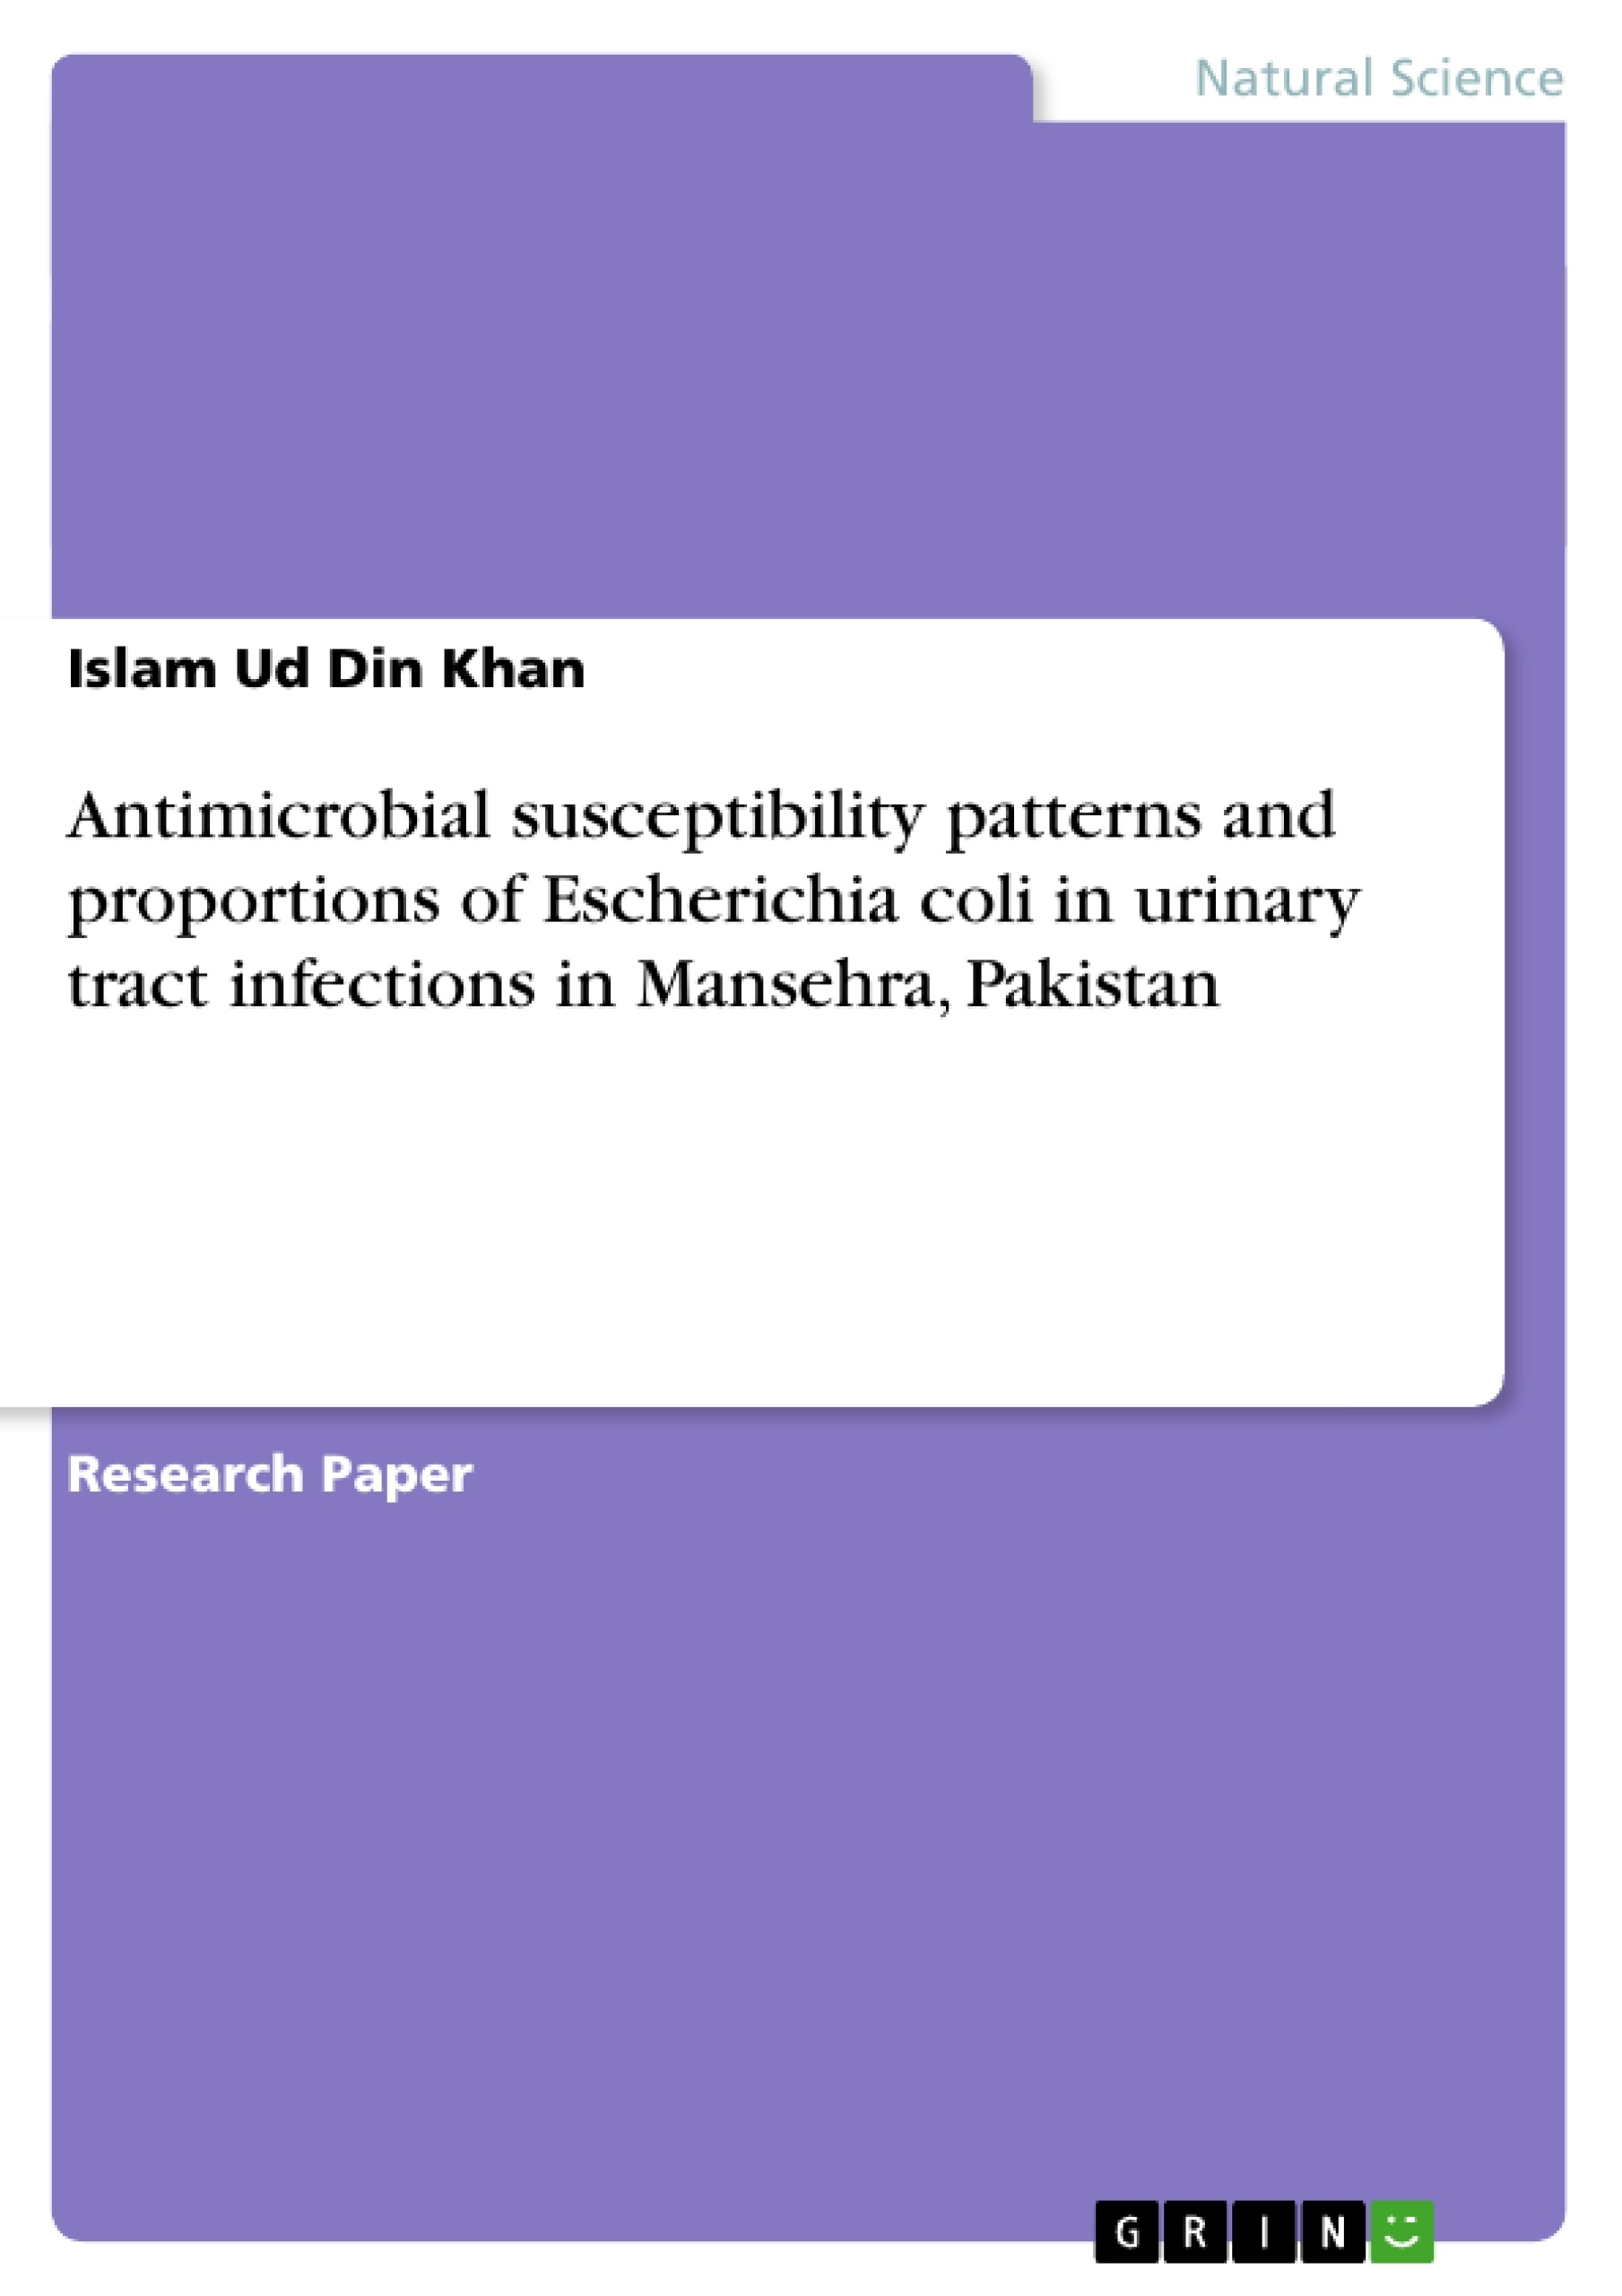 Título: Antimicrobial susceptibility patterns and proportions of Escherichia coli in urinary tract infections in Mansehra, Pakistan